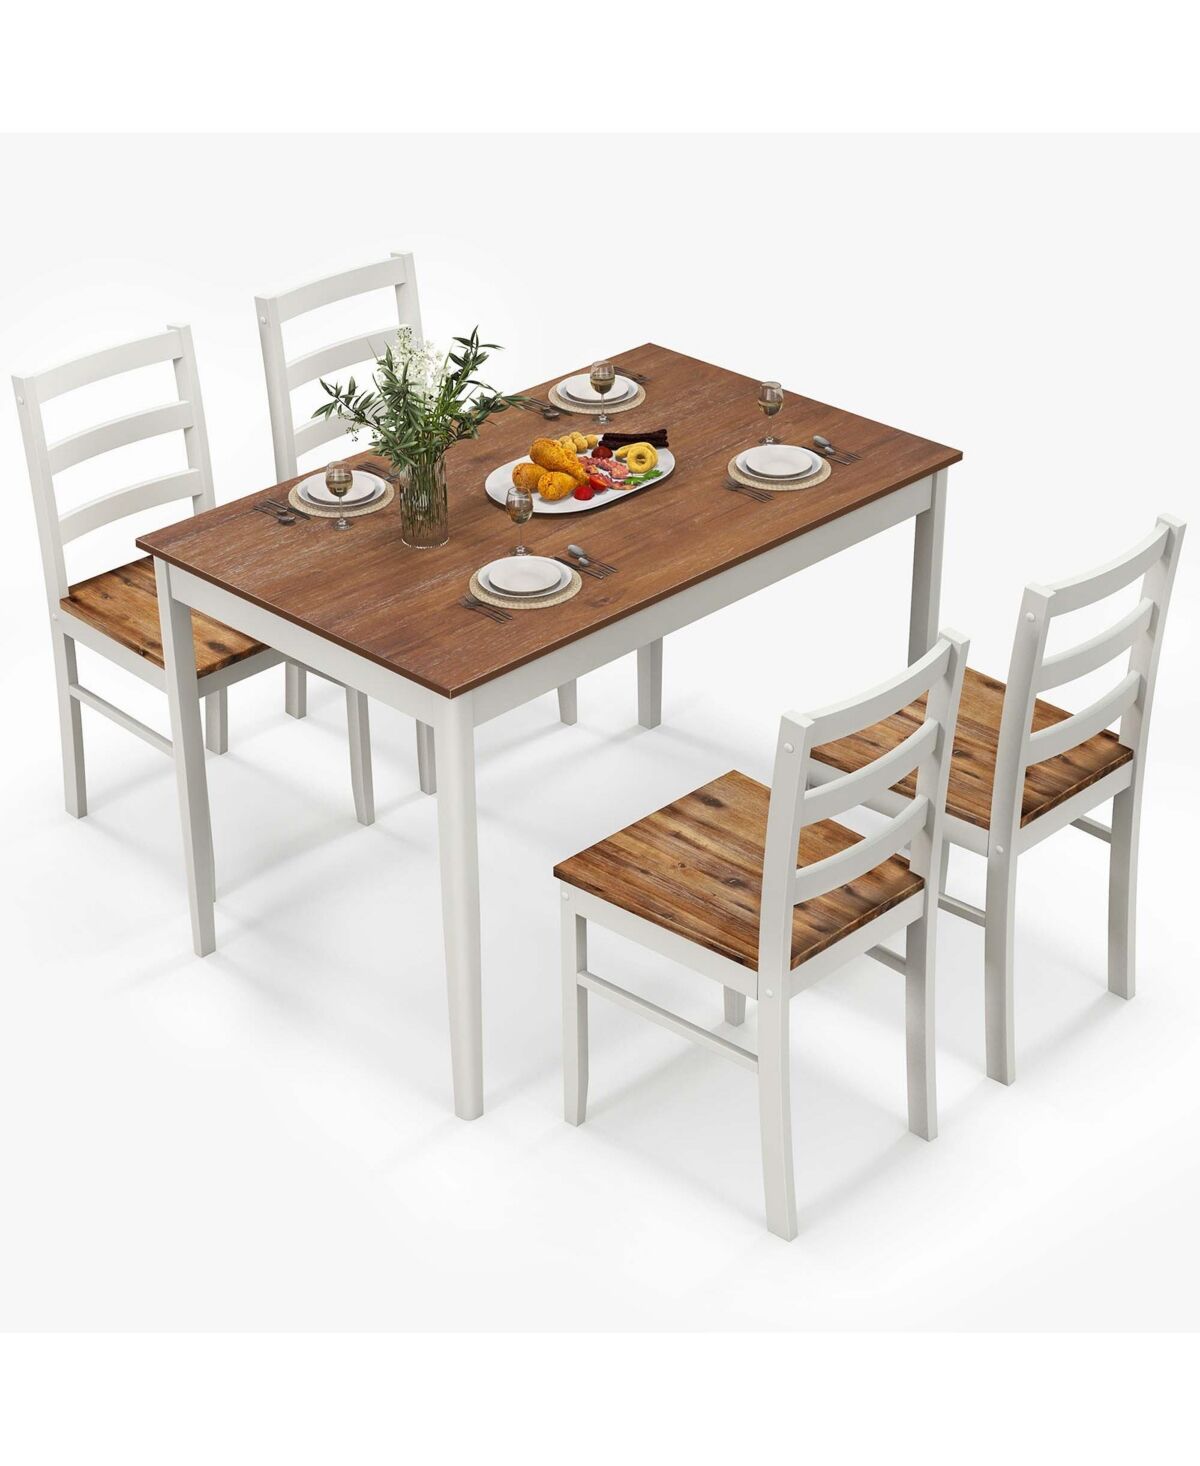 Costway 5-Piece Dining Set Solid Wood Kitchen Furniture with Rectangular Table & 4 Chairs - Brown